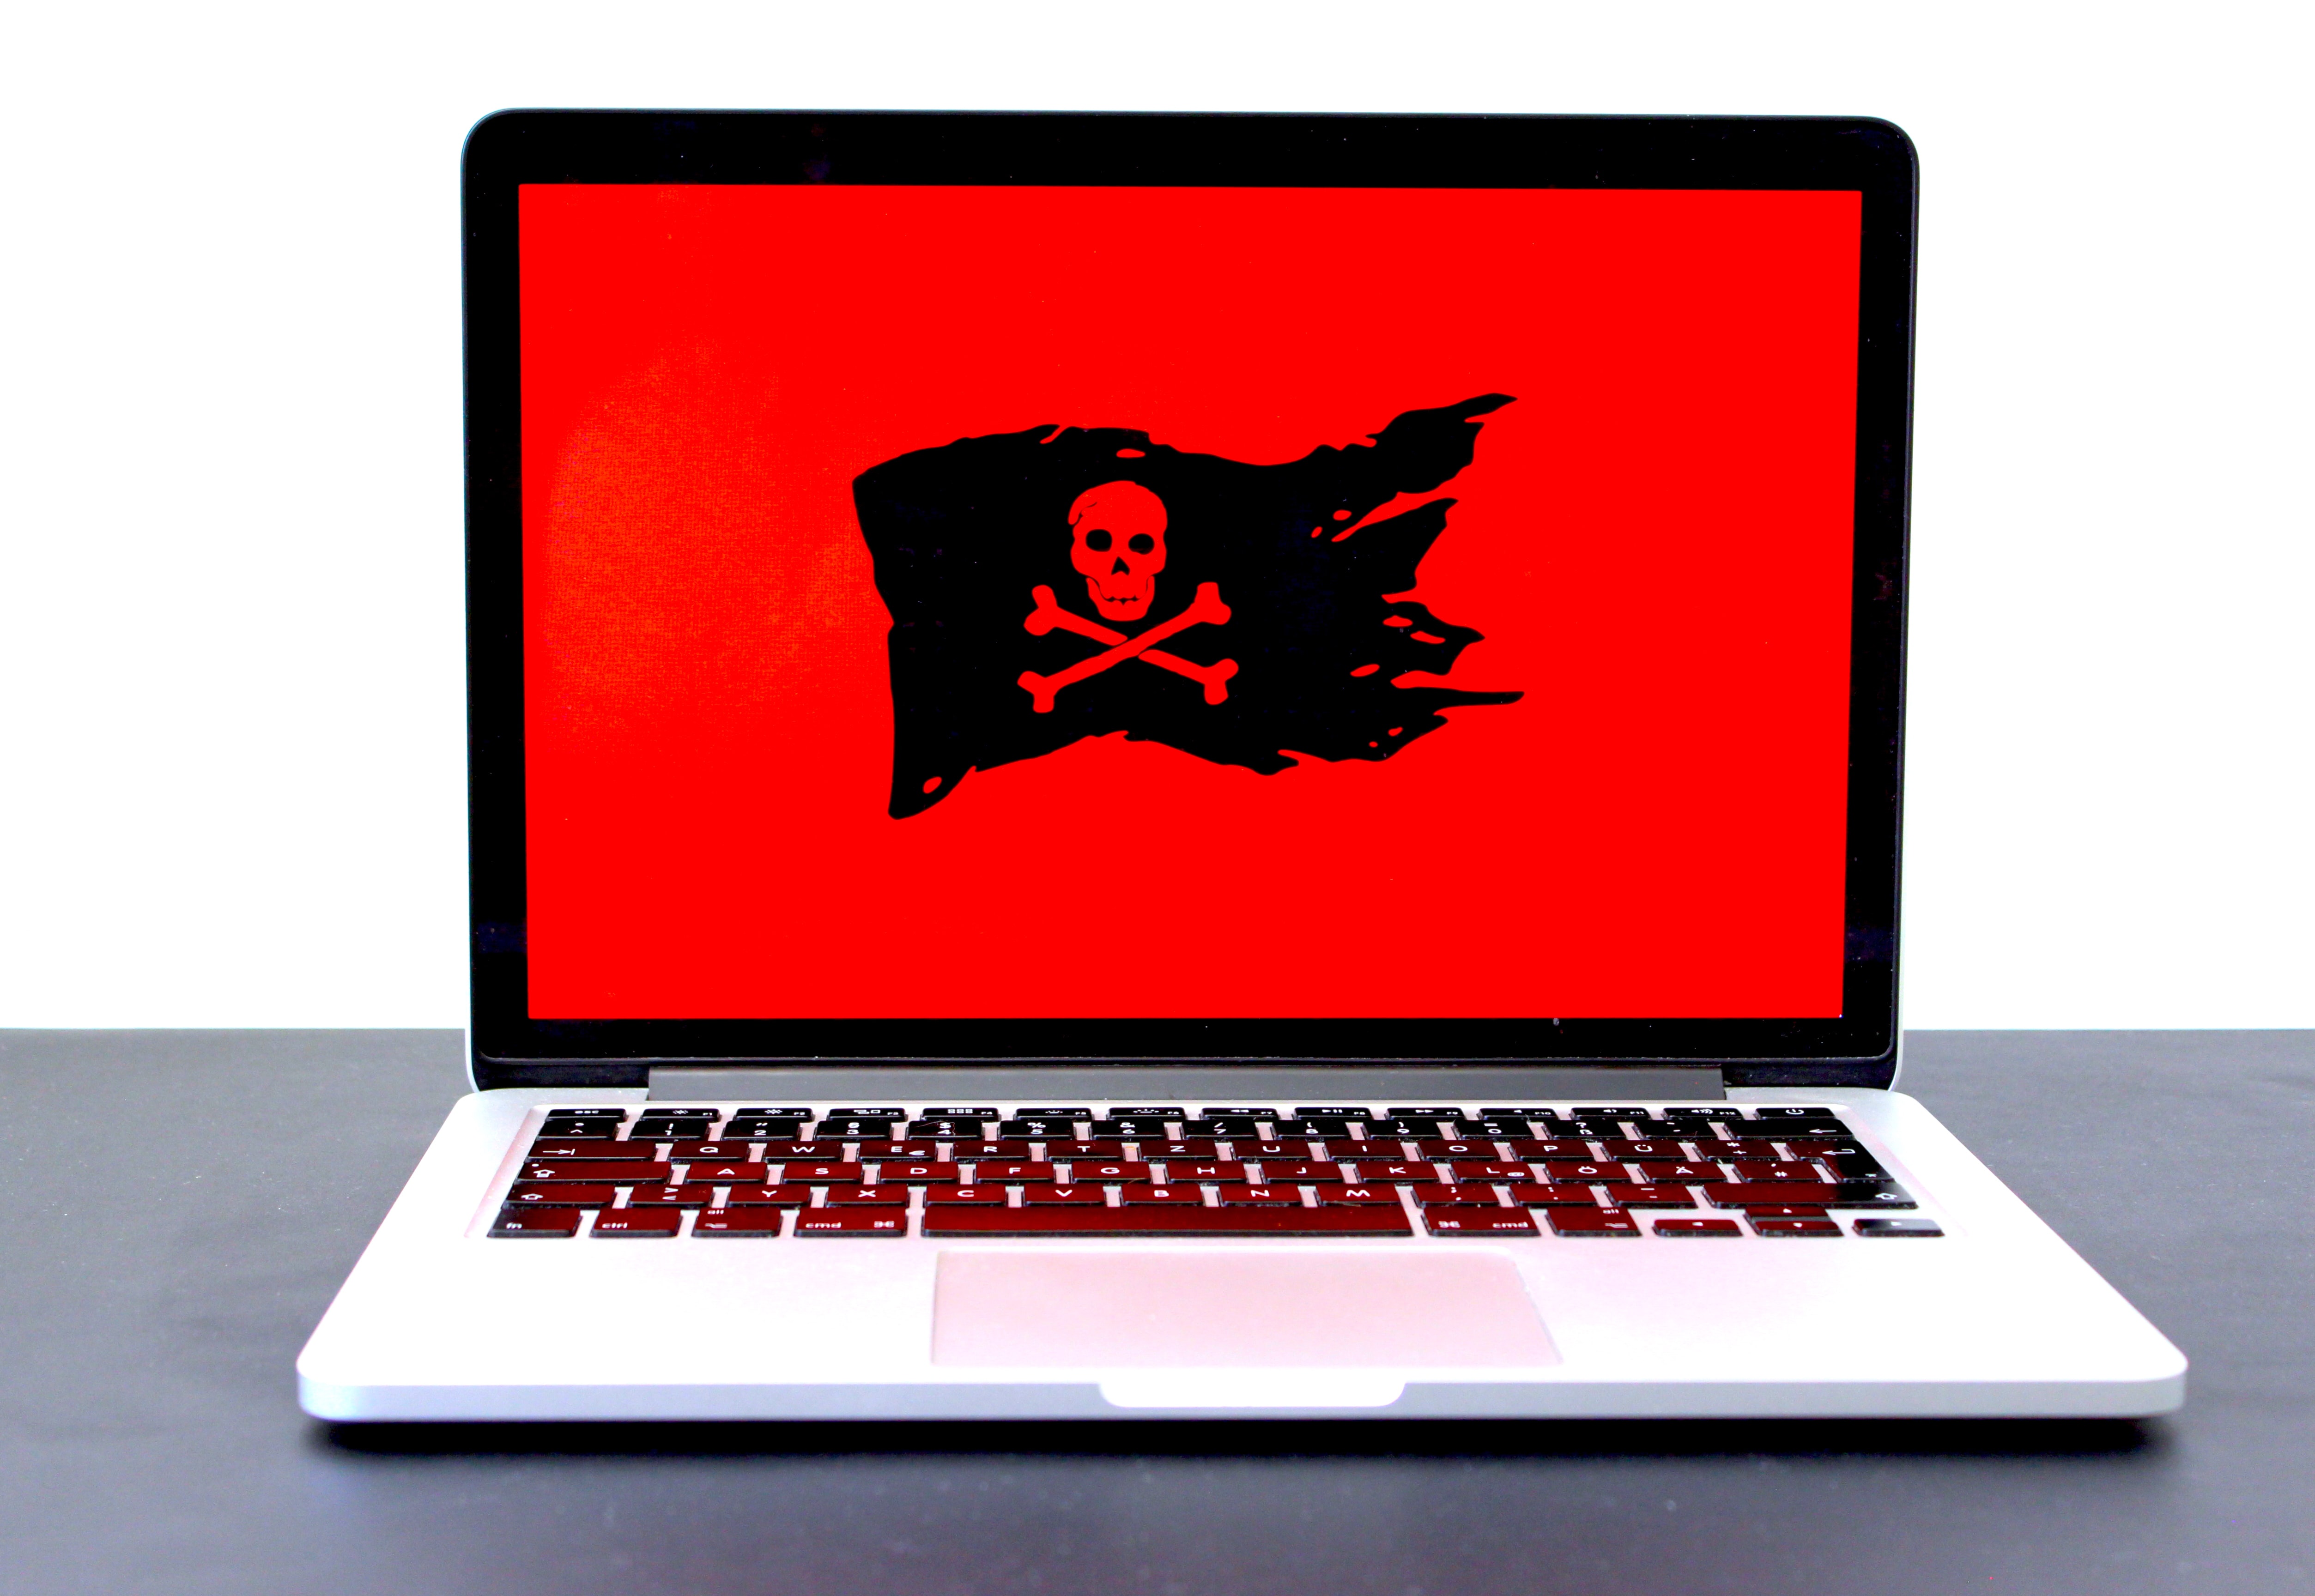 Laptop with red screen and skull and cross bones flag